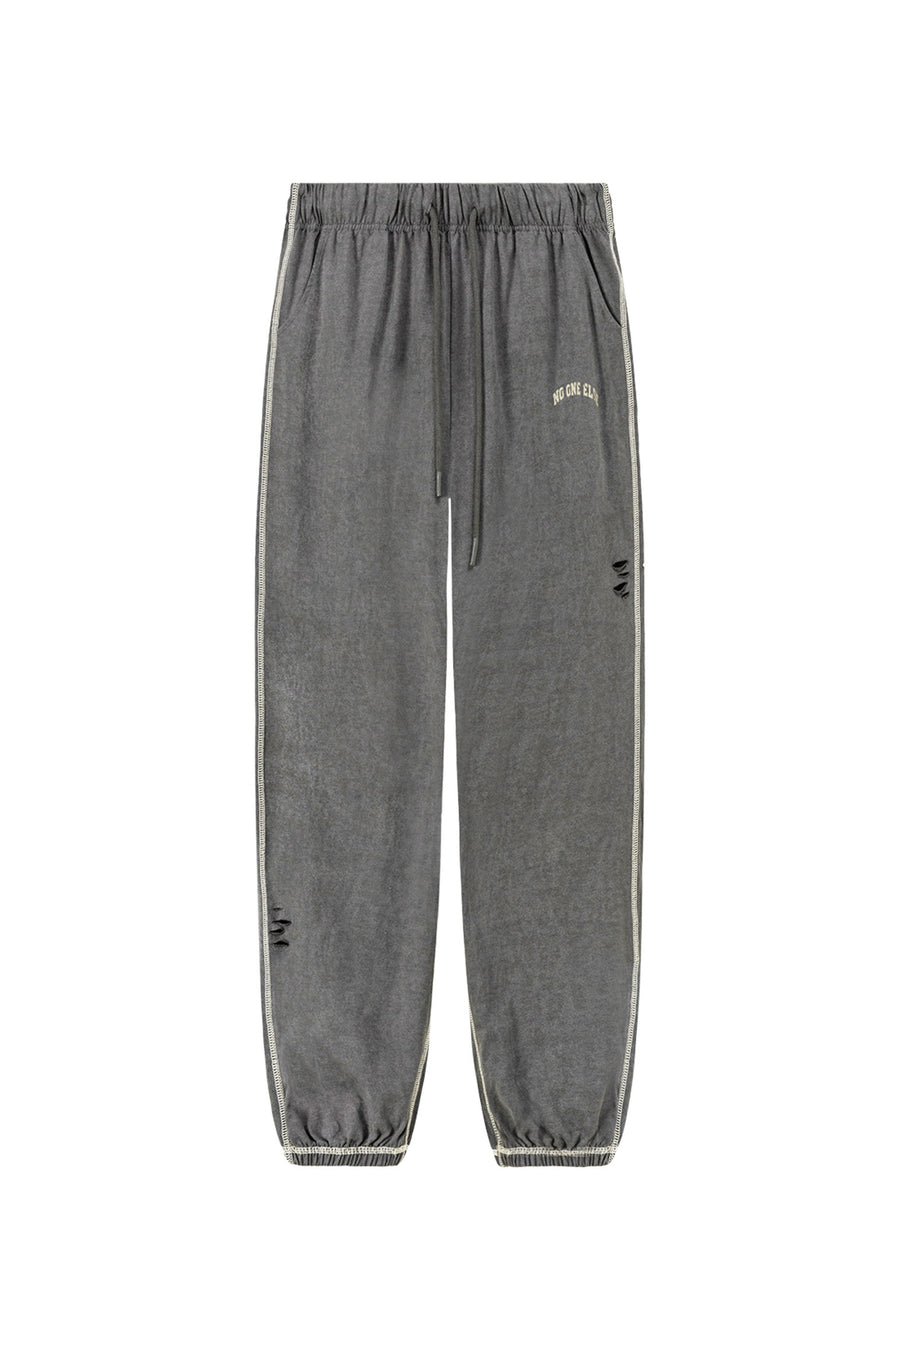 Daily Color String Jogger Sweatpants